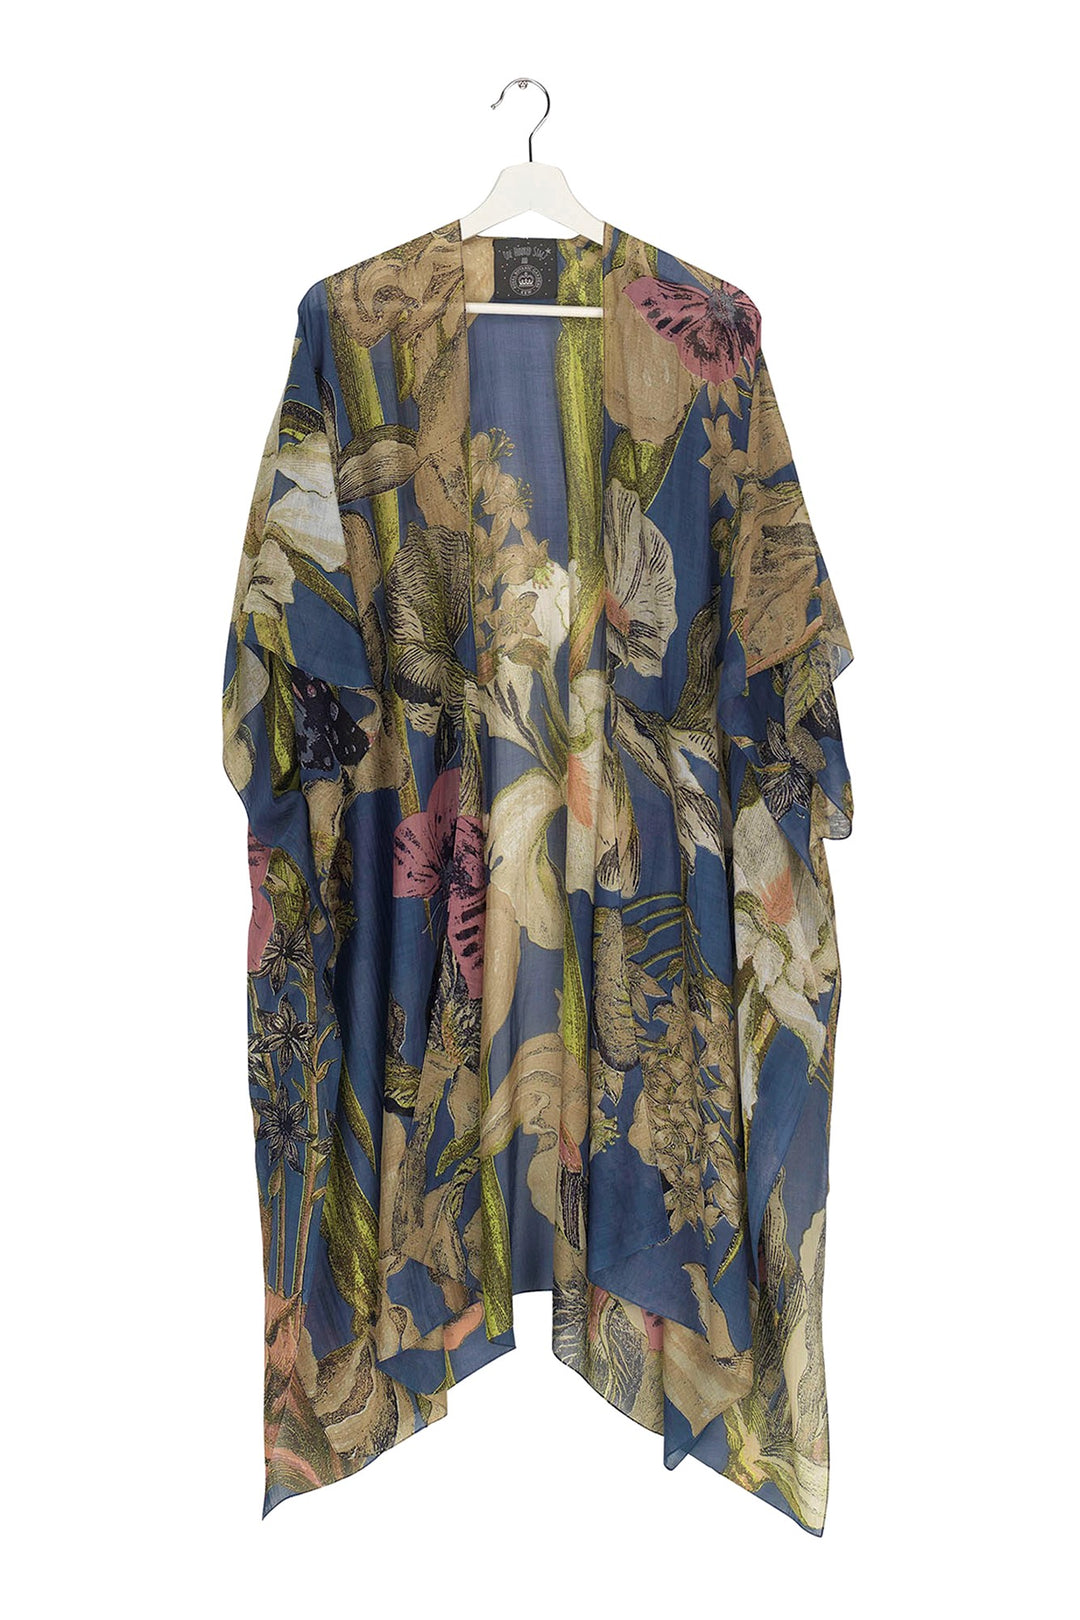 KEW Iris Blue Throwover- These lightweight throwovers make the perfect cover up, they are mid-length with an open front and loose arms, perfect for the warmer months or worn on holiday as the ideal resort wear. 